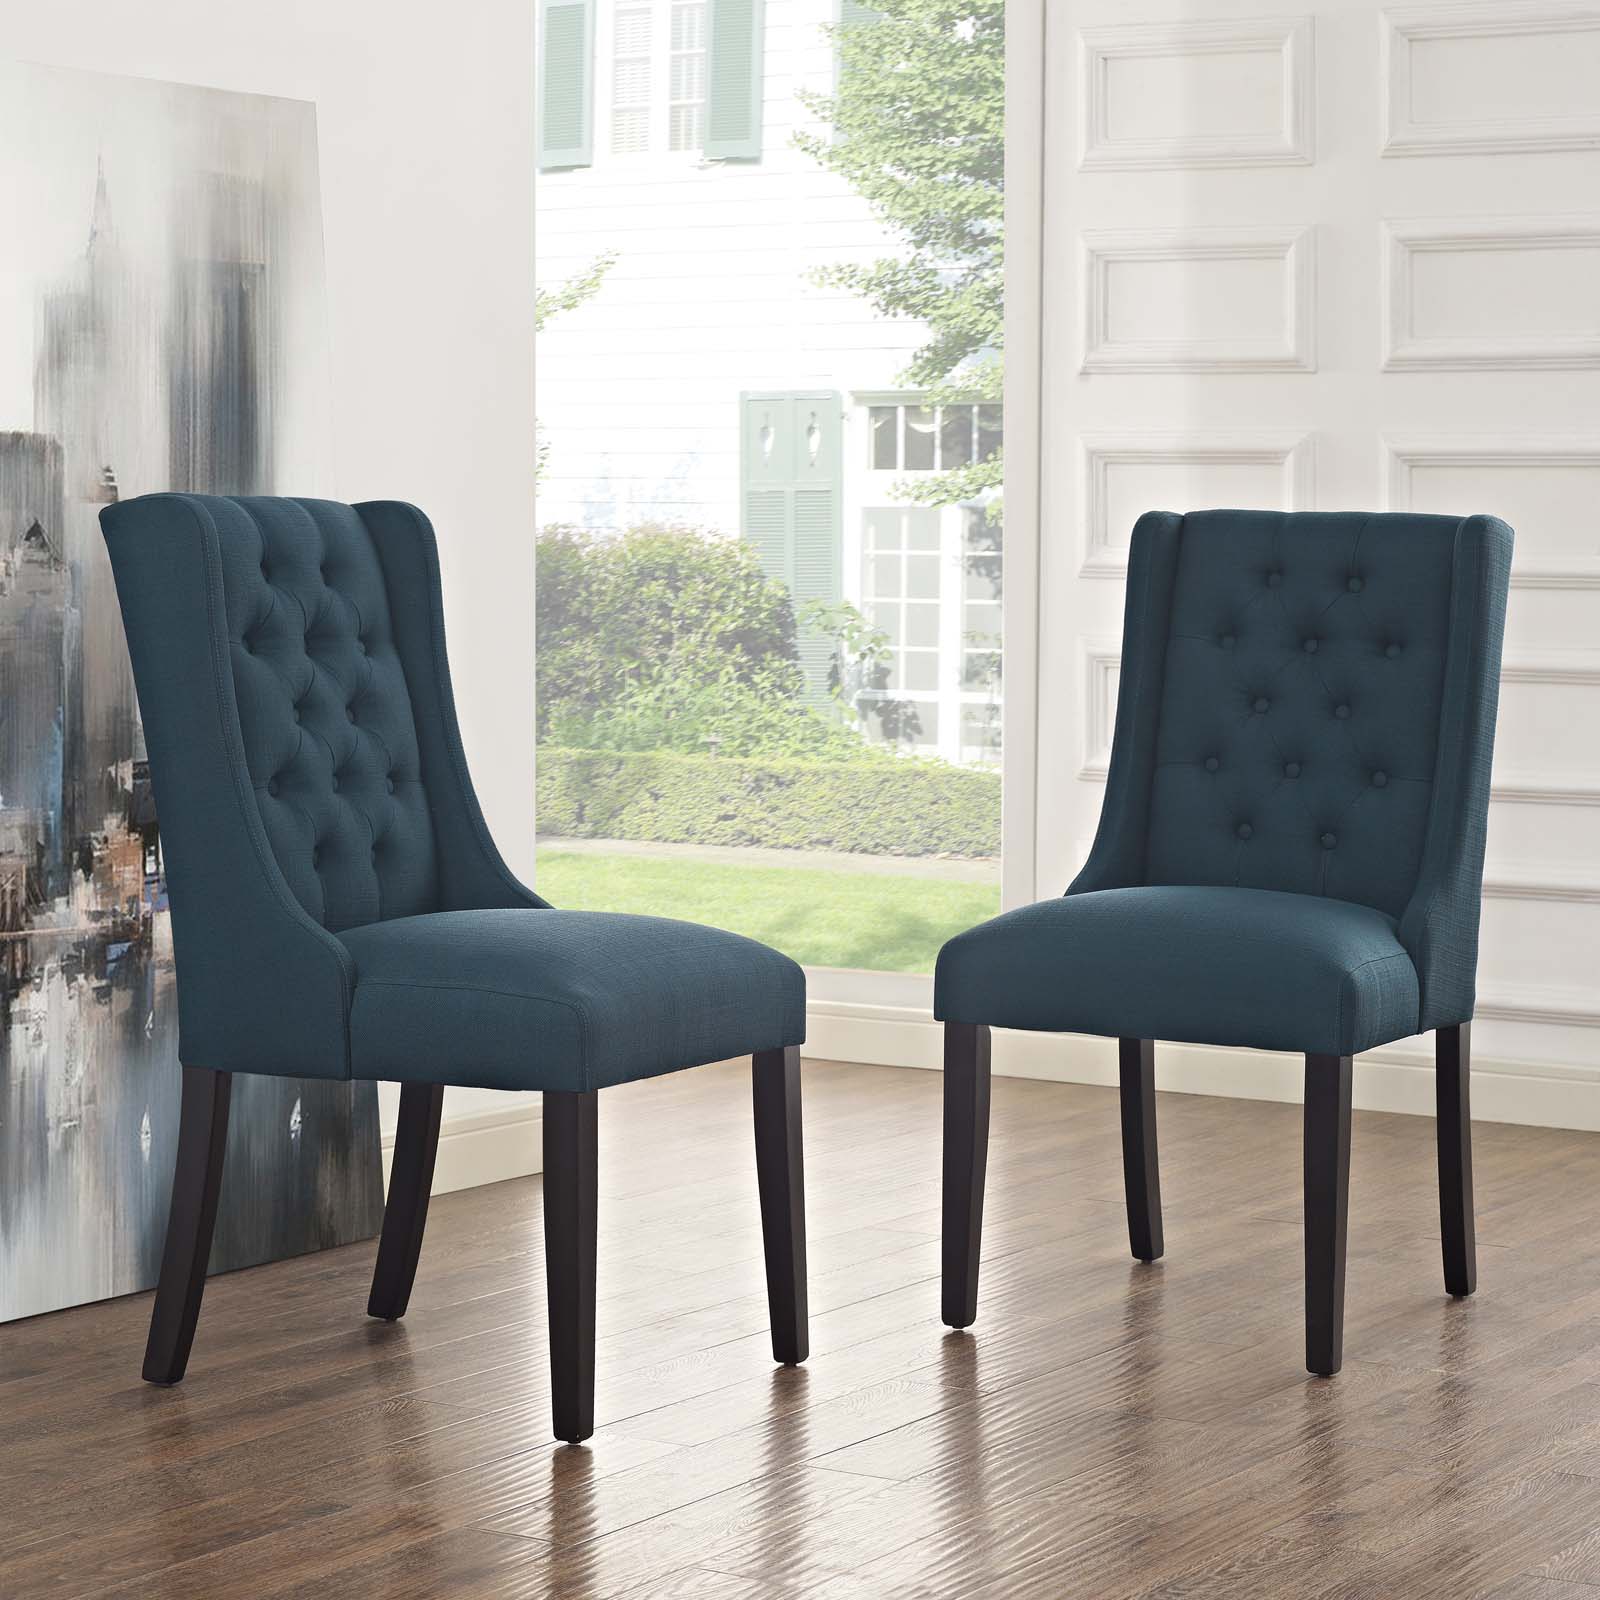 Baronet Dining Chair Fabric Set of 2 - East Shore Modern Home Furnishings